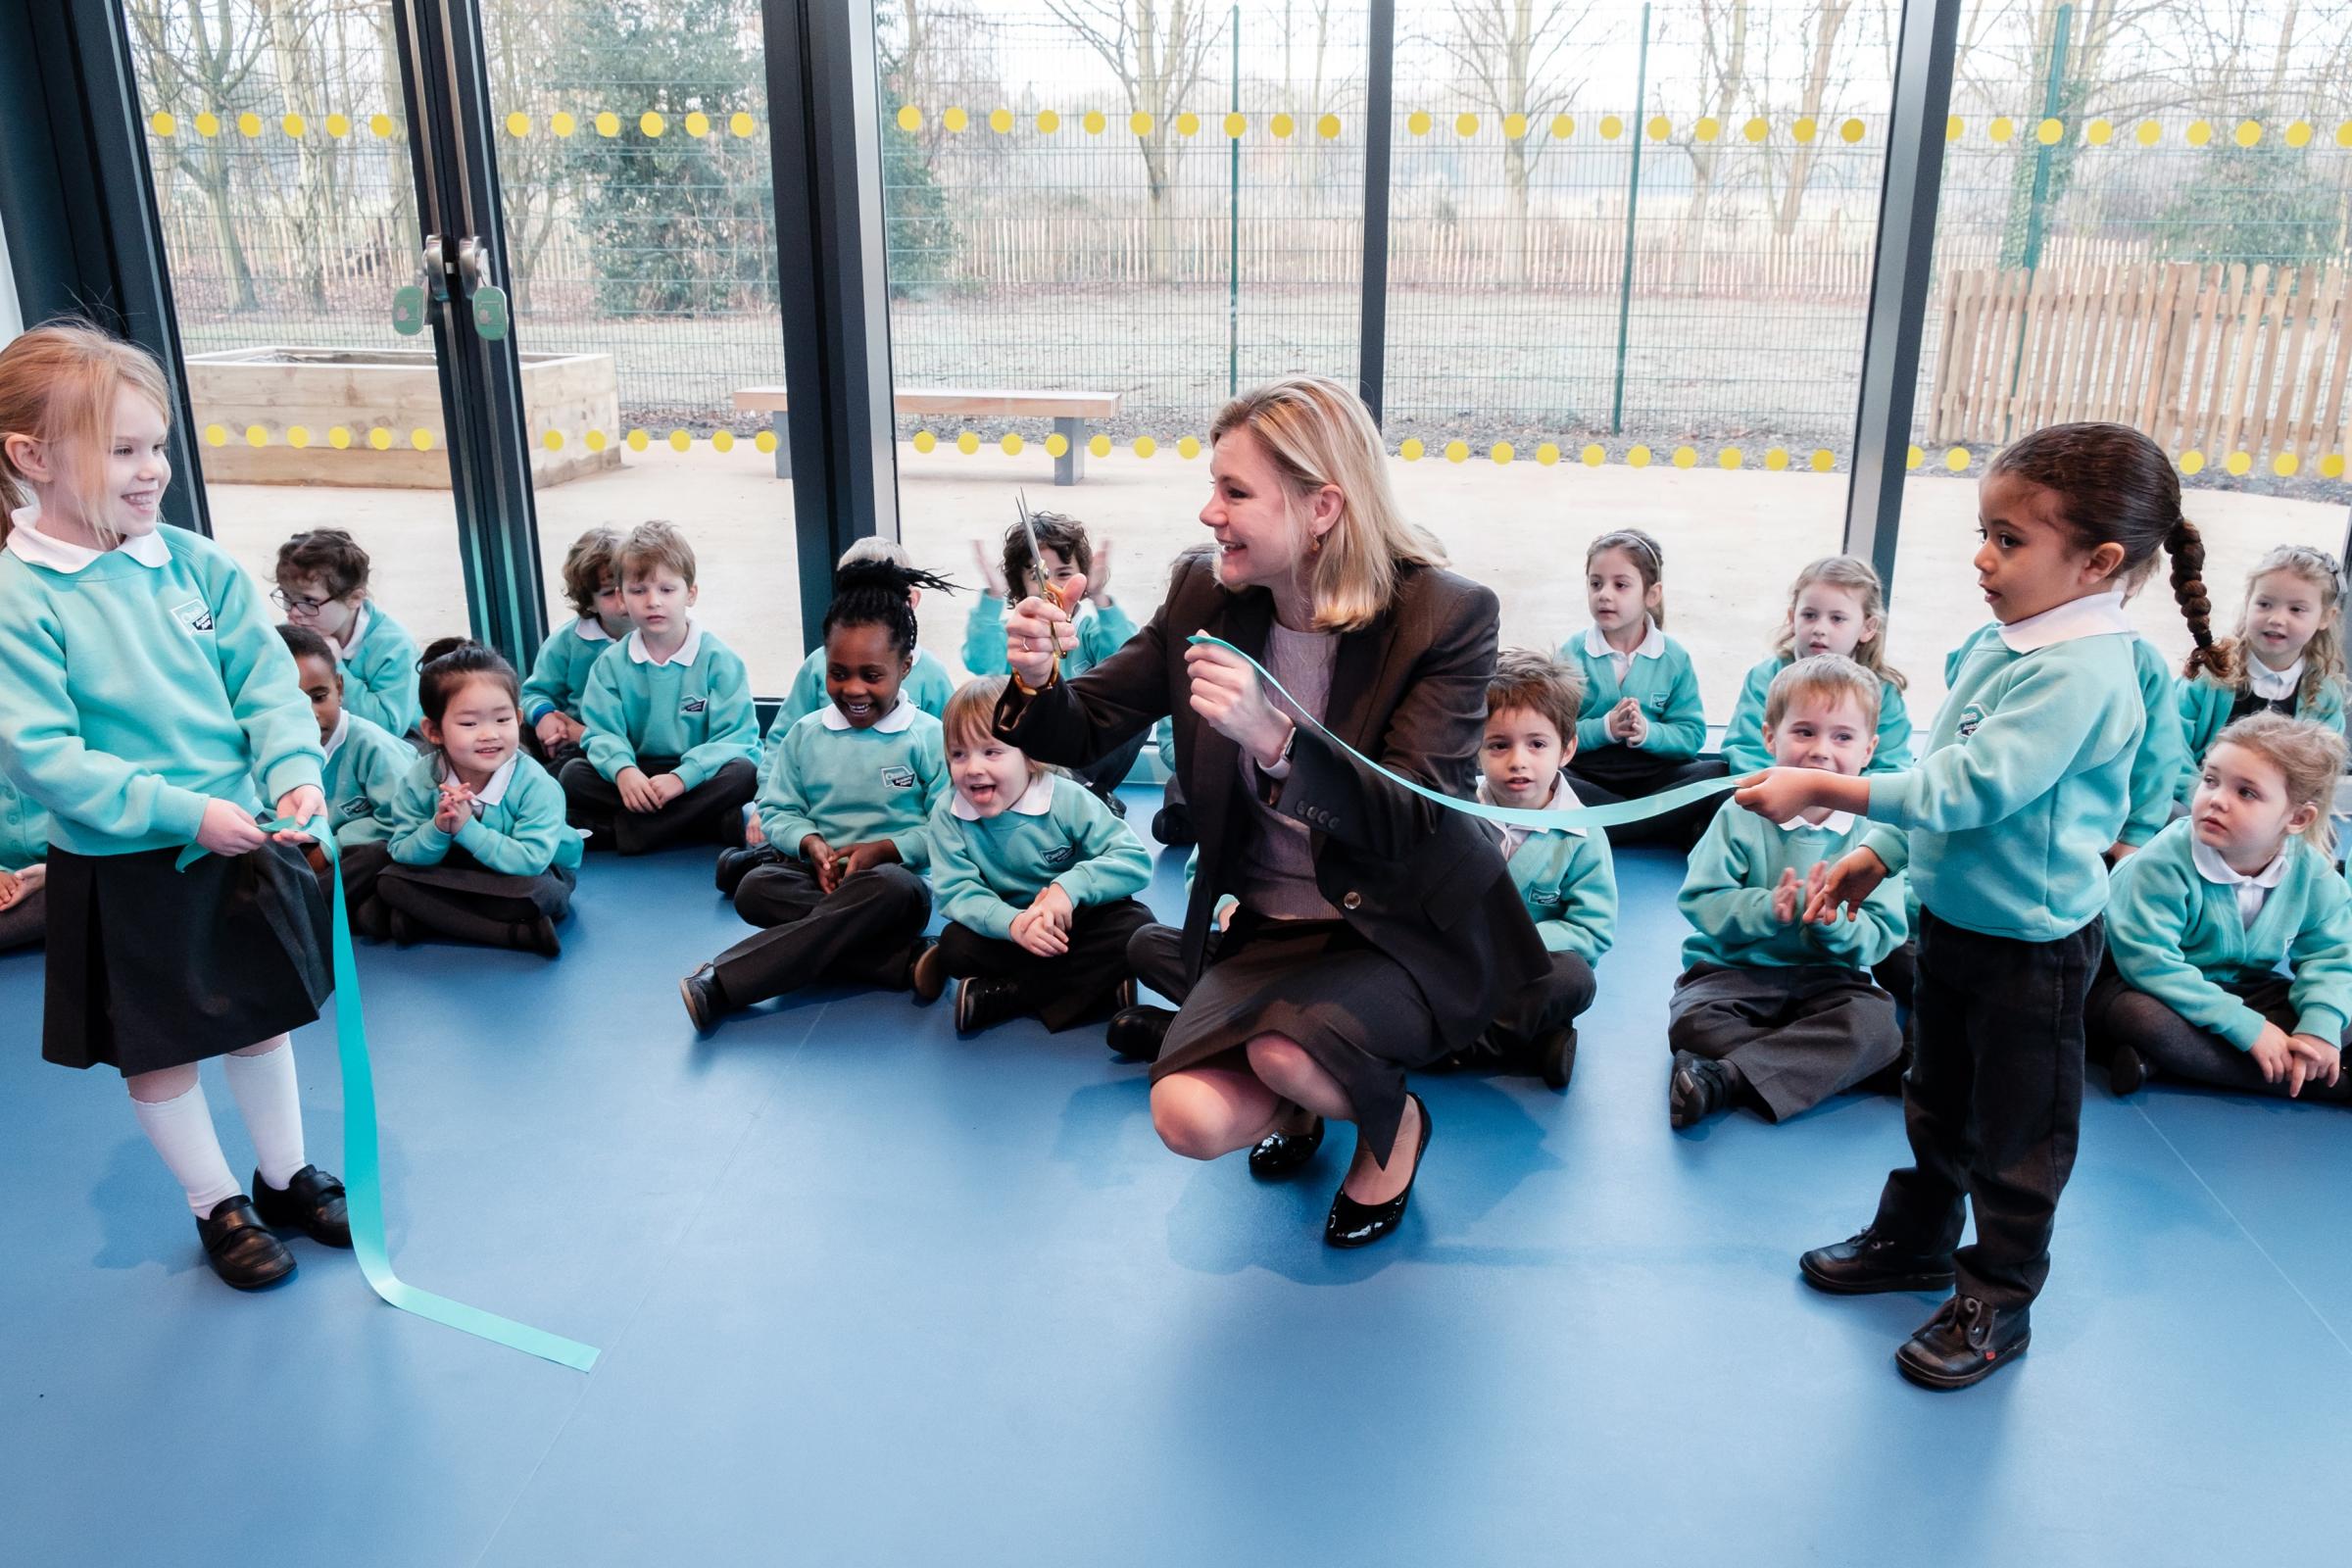 New primary school opens as academy in Putney